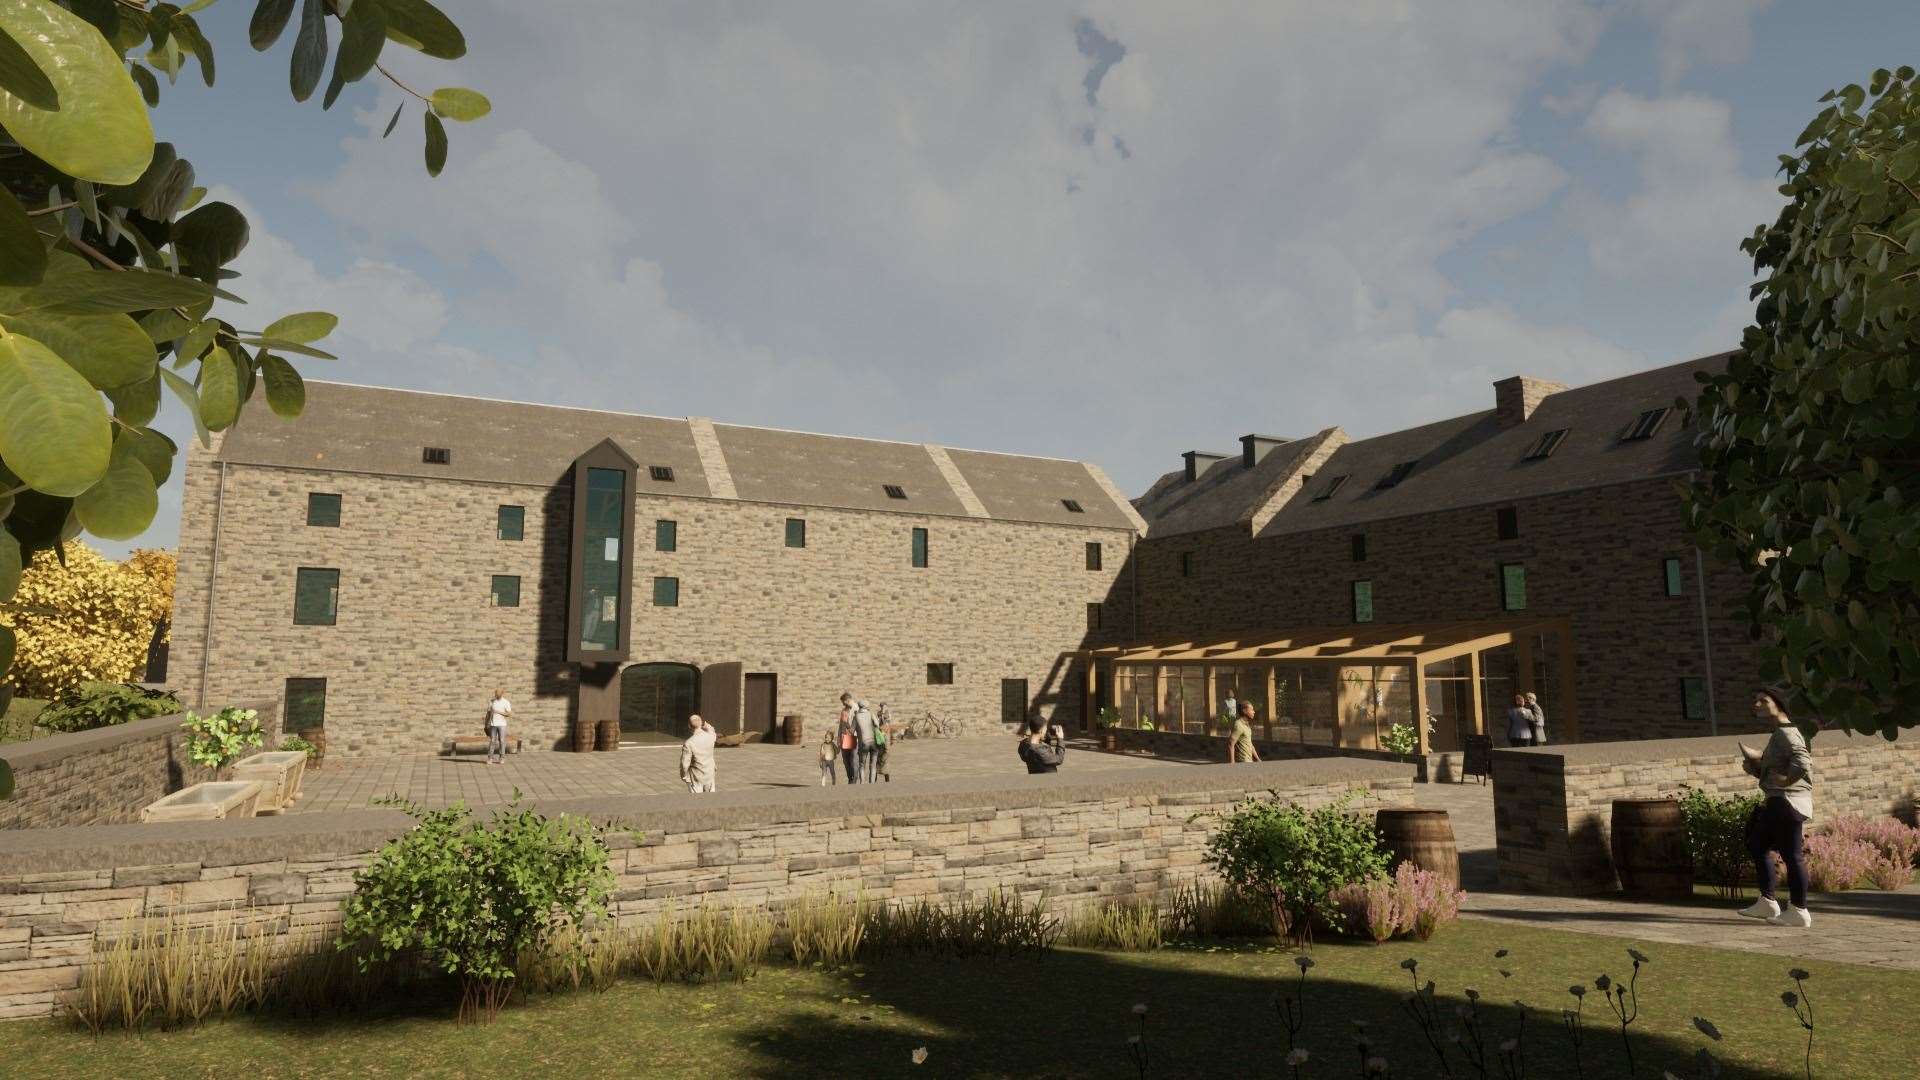 How the mill could look after the project is complete.